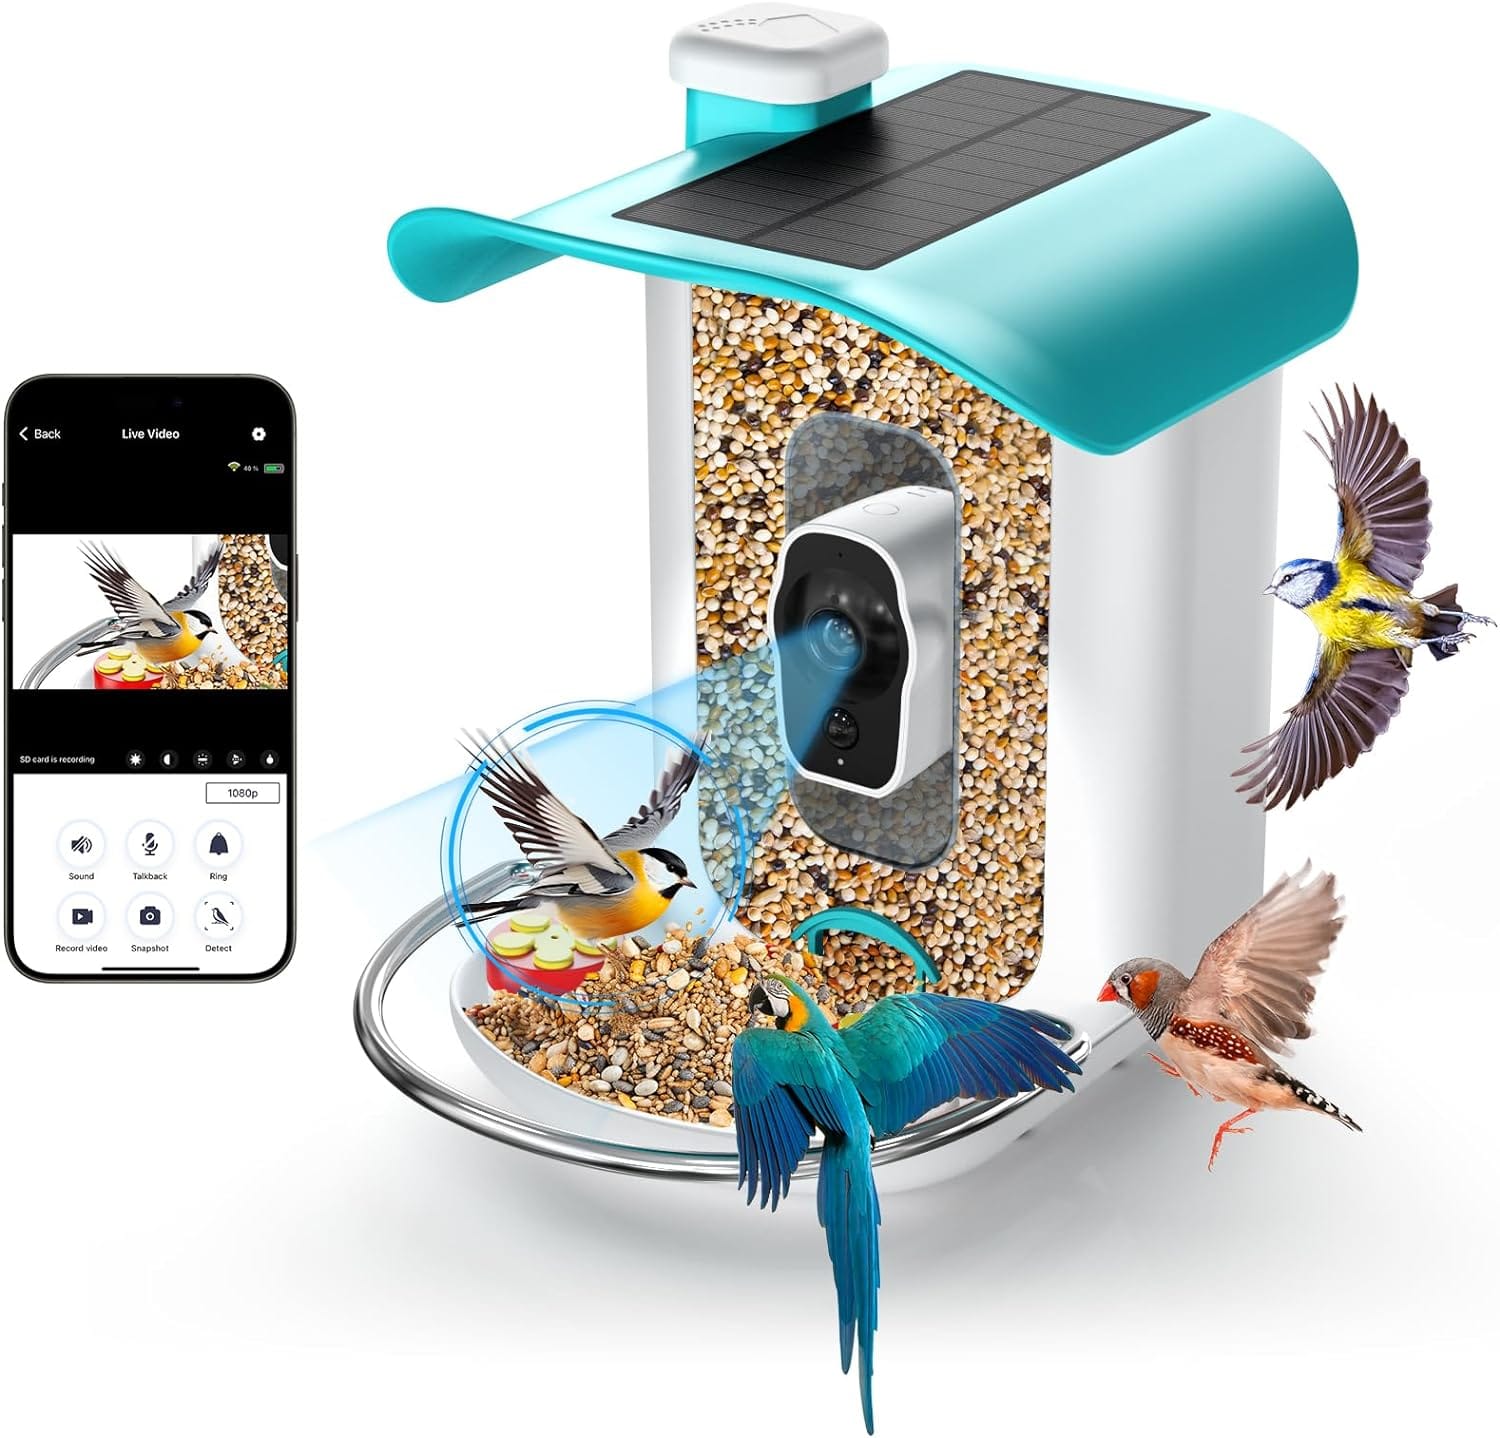 Discover the Best Smart Bird Feeder: Our Top Pick for Nature Lovers